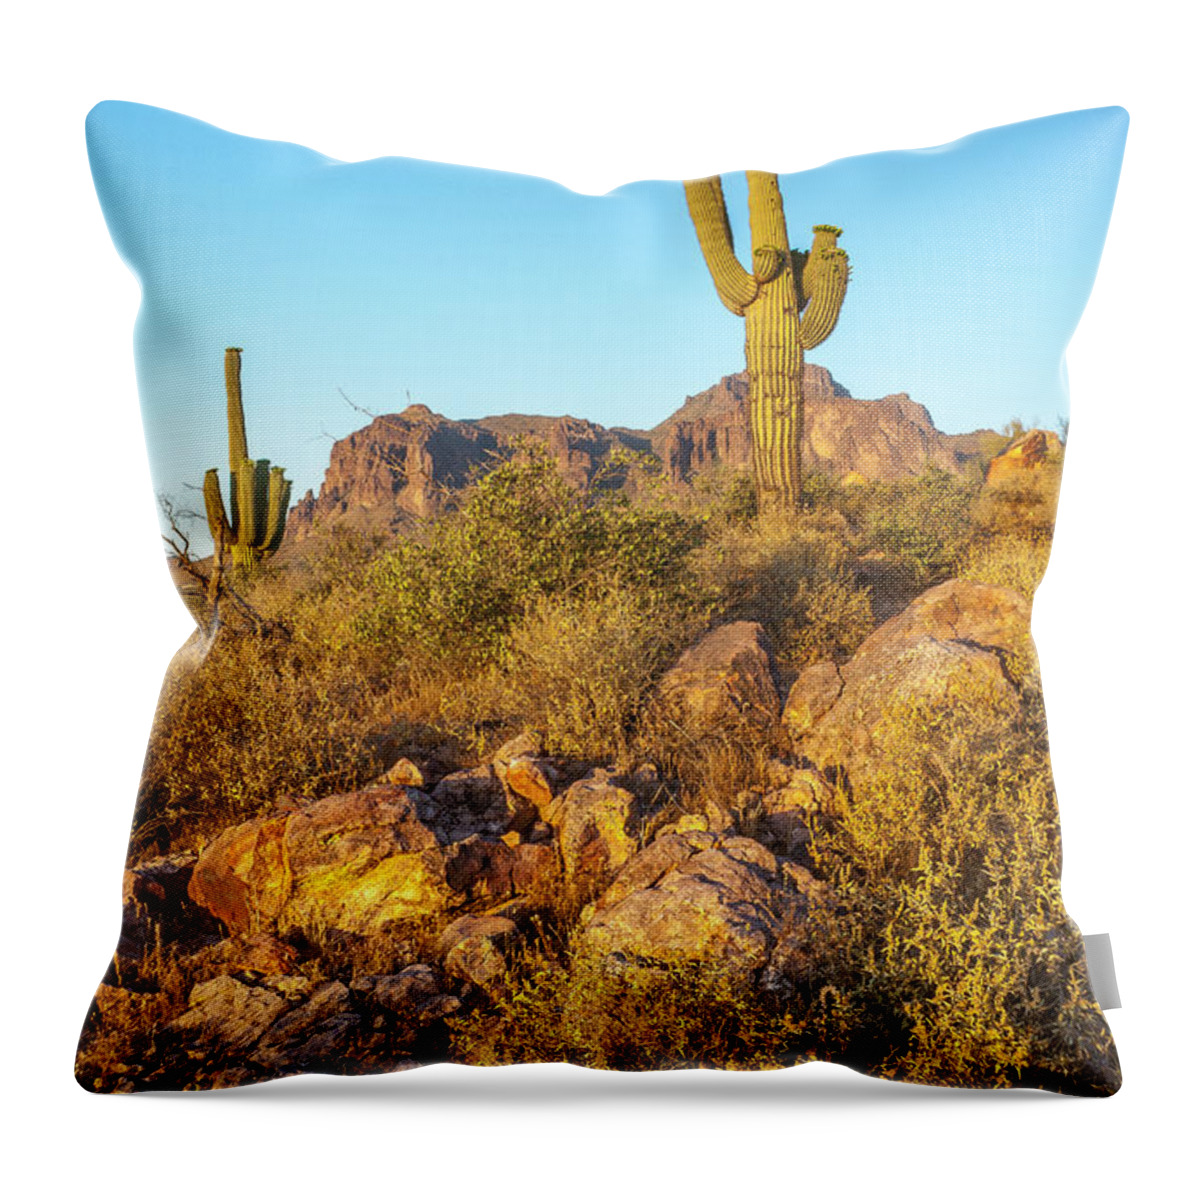 Saguaro Cactus Throw Pillow featuring the photograph Saguaro Cactus in the Superstitions by Donald Pash